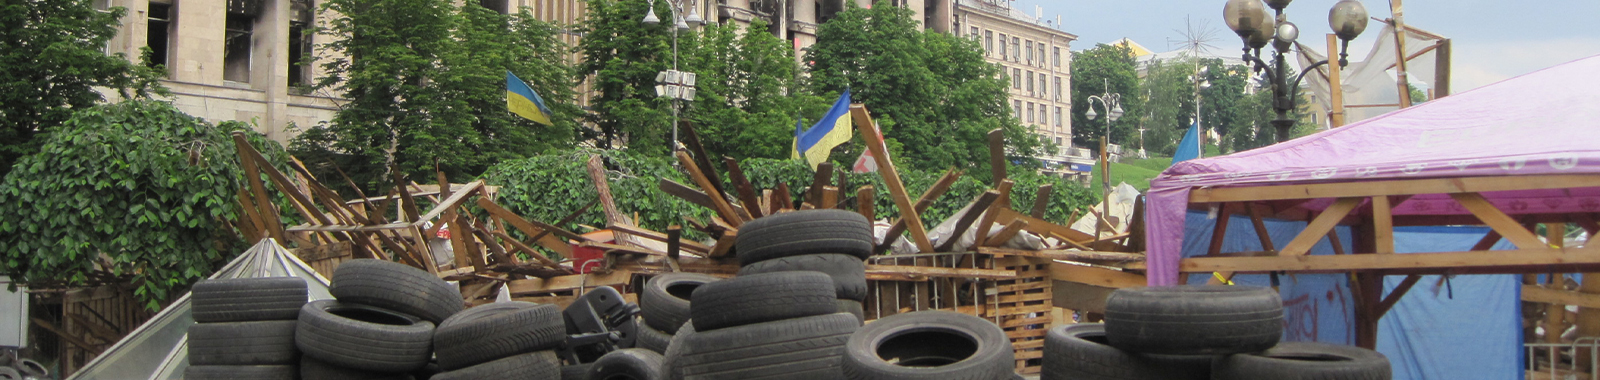 Detail of color photograph showing a barricaded section of Kyiv during the 2014 Maidan 